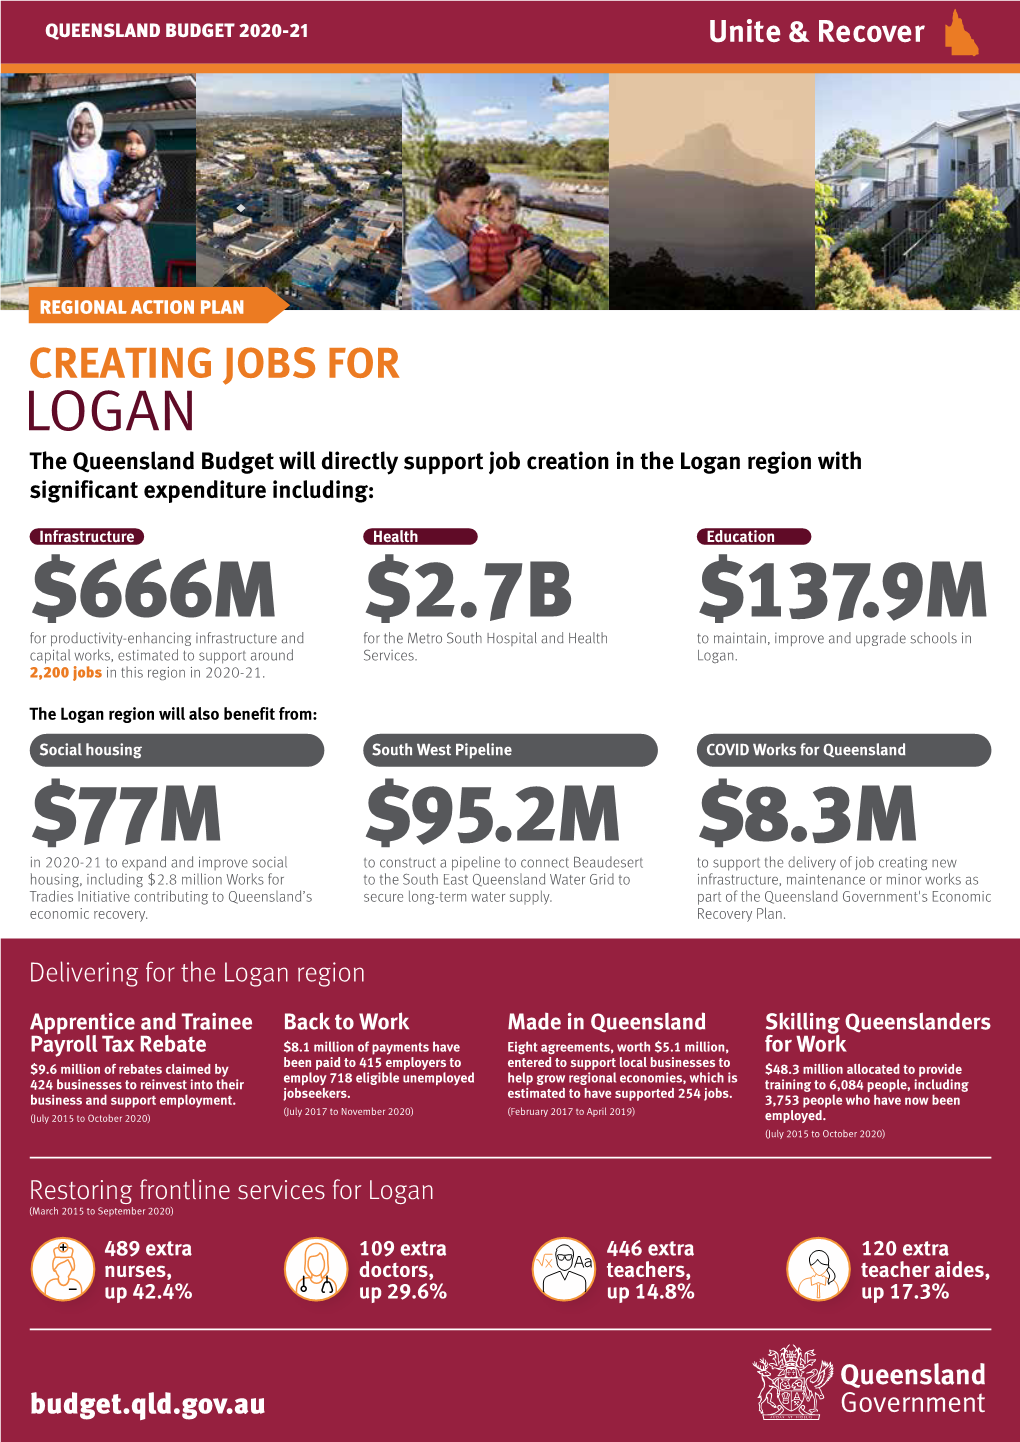 LOGANCREATING JOBS on the Training in 2020–21 $17.5B Enhancing Frontline Services